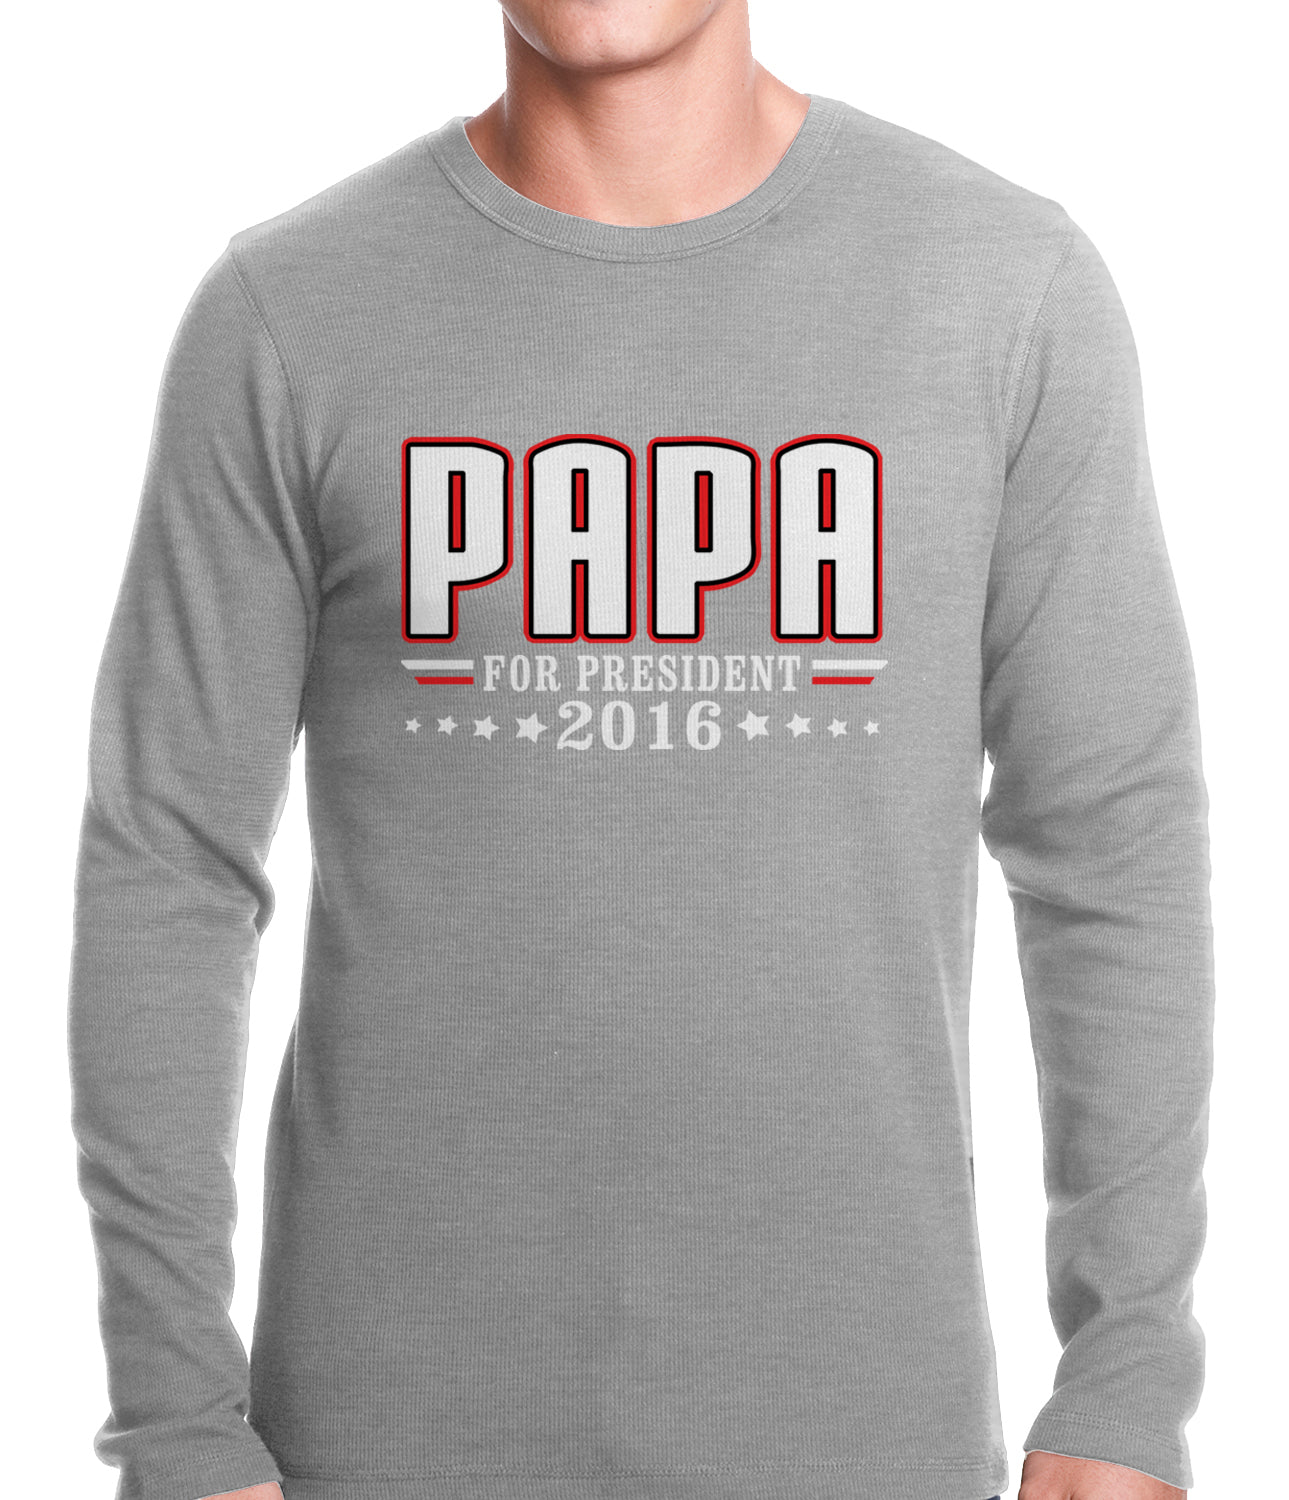 PAPA for PRESIDENT 2016 - Vote for Papa Thermal Shirt